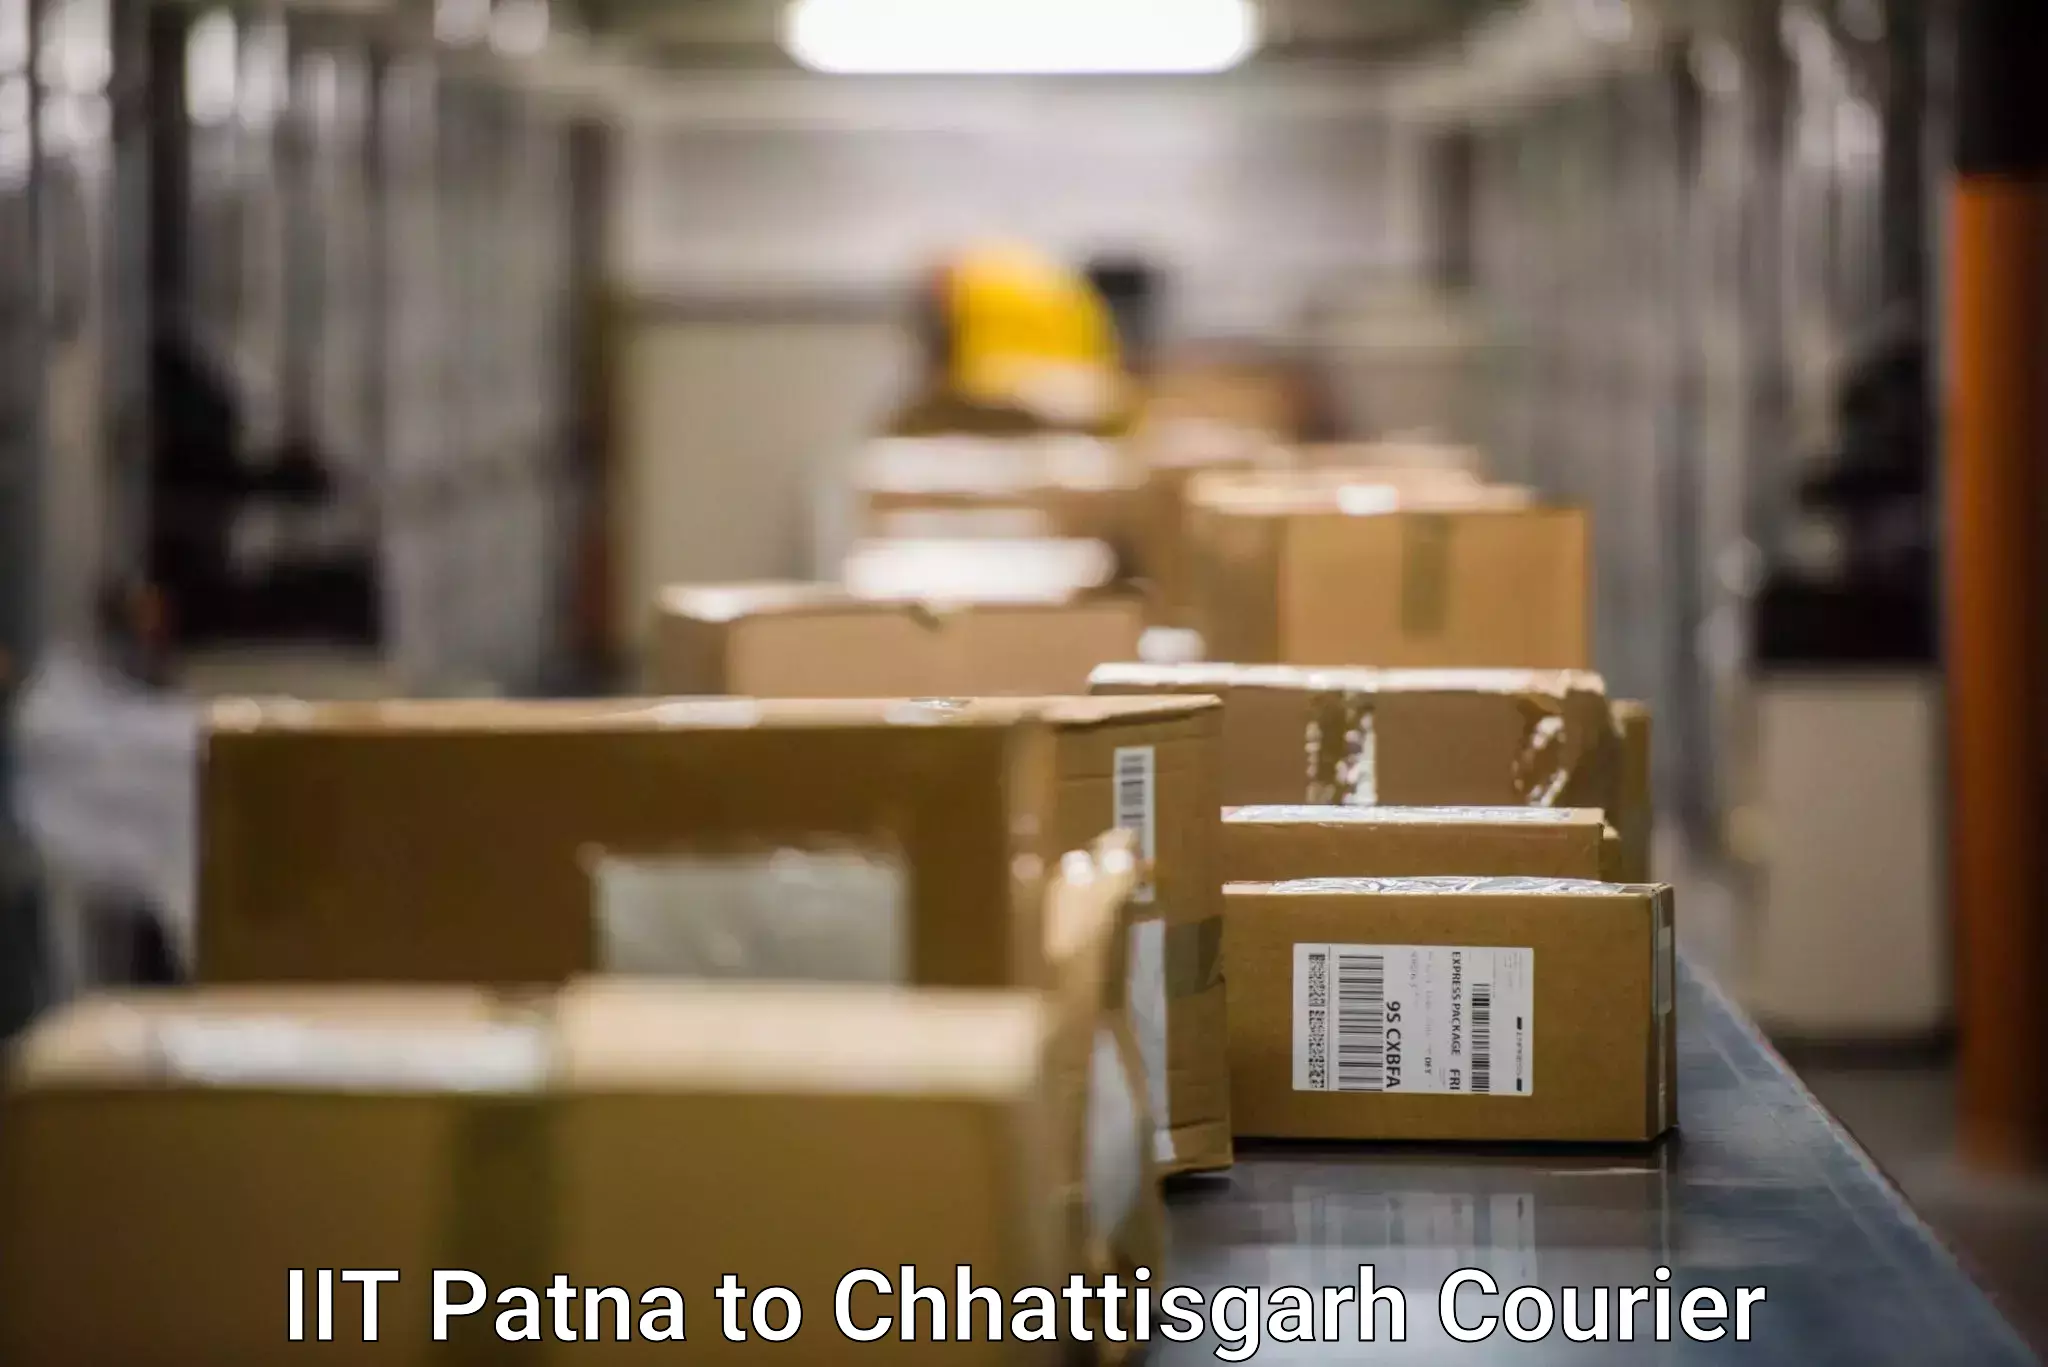 Personalized courier experiences IIT Patna to Korba